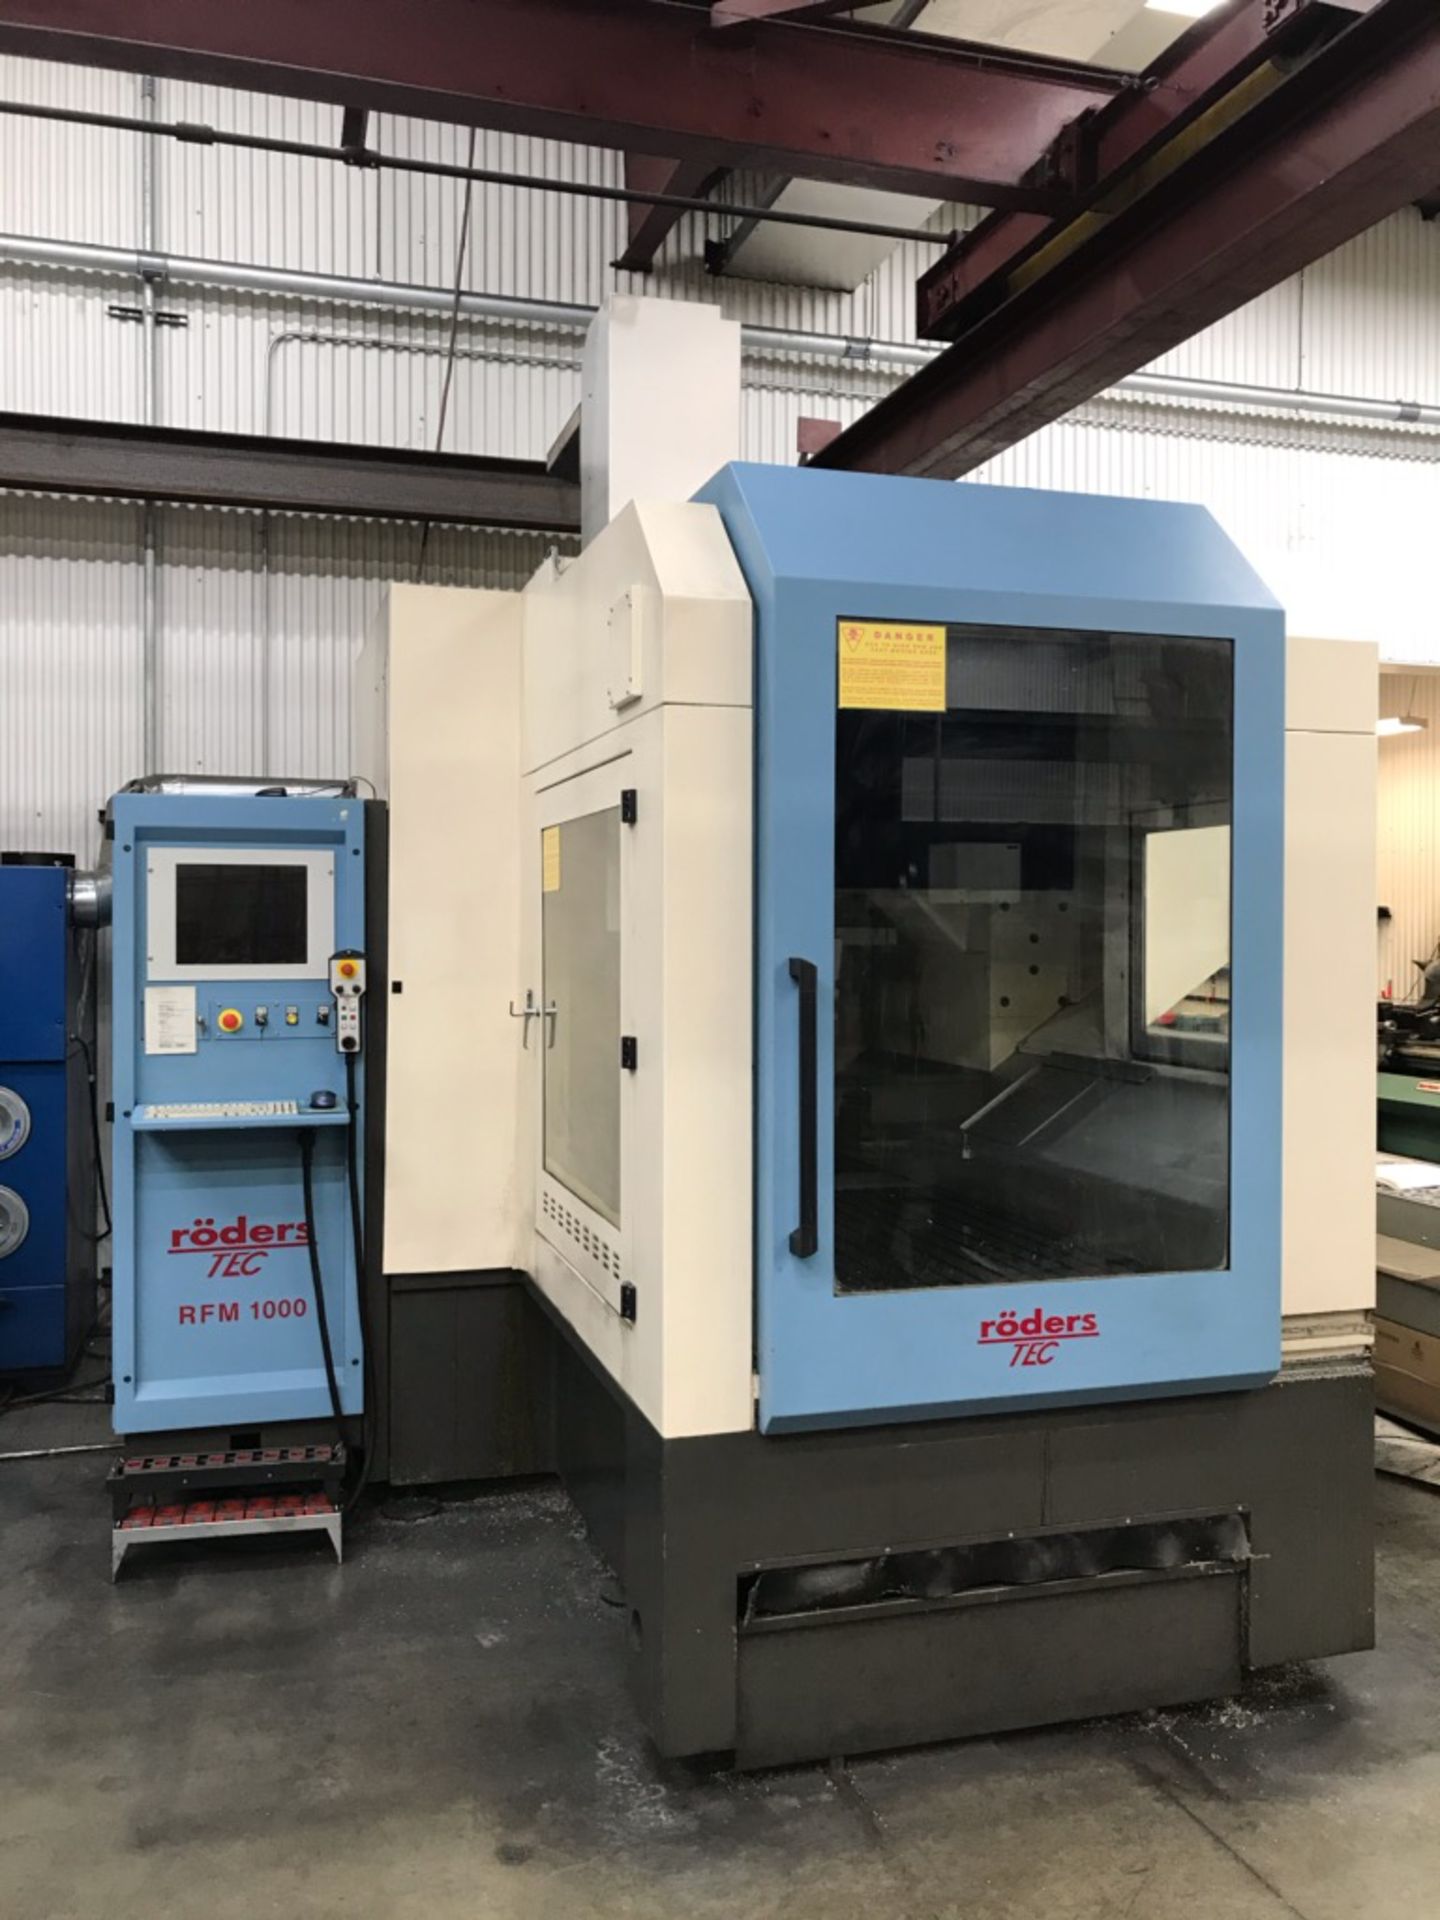 Roders RFM 1000 CNC 3-Axis Vertical Machining Center, New 2004 (see Notes)